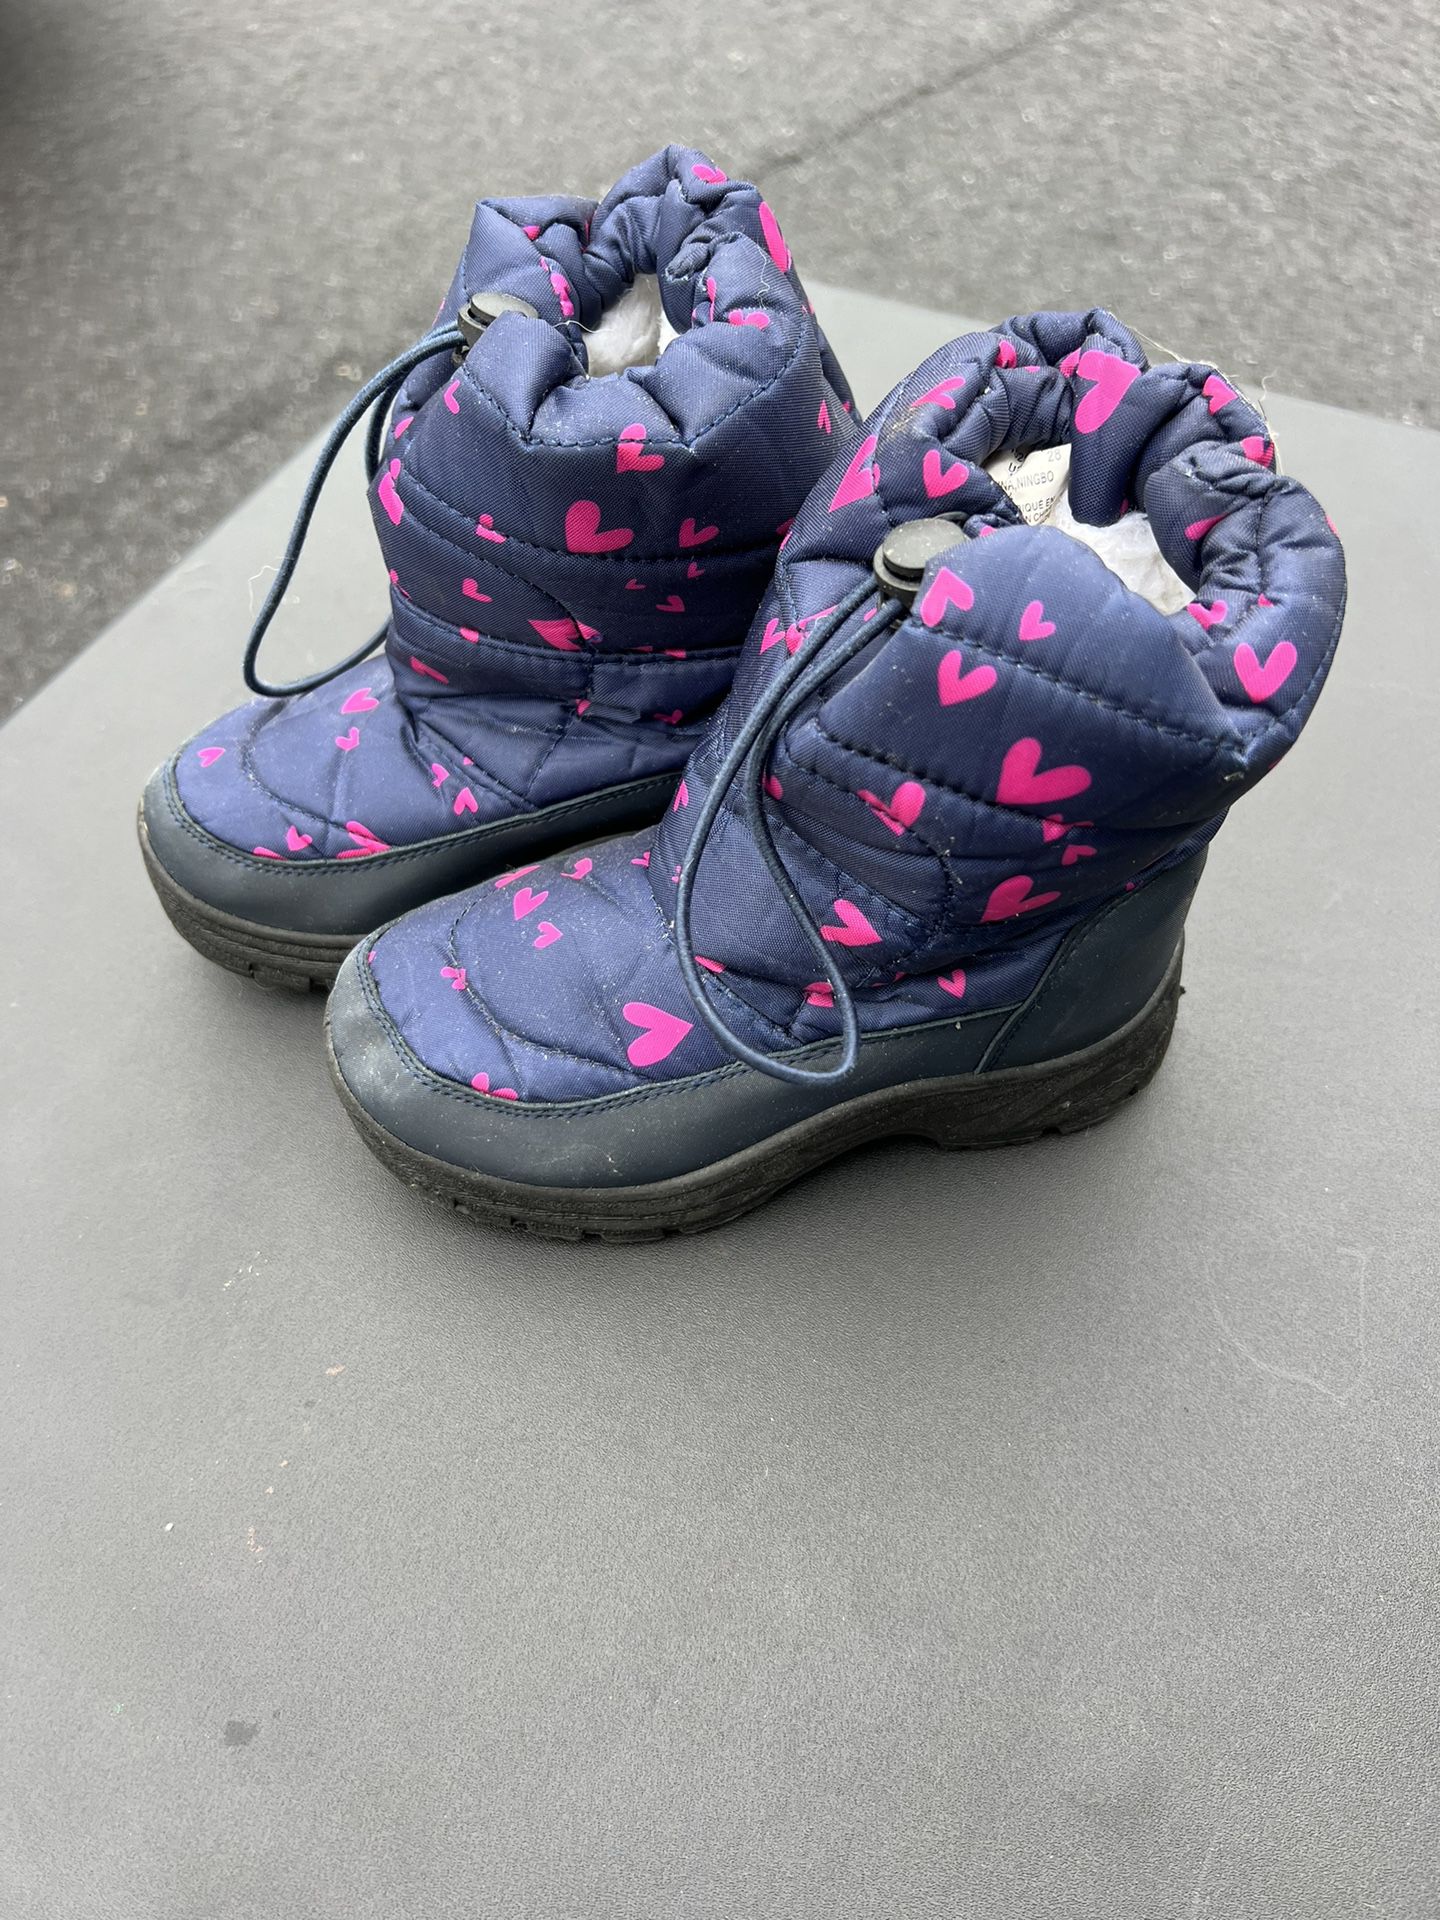 Girls Size 11 Snow Boot